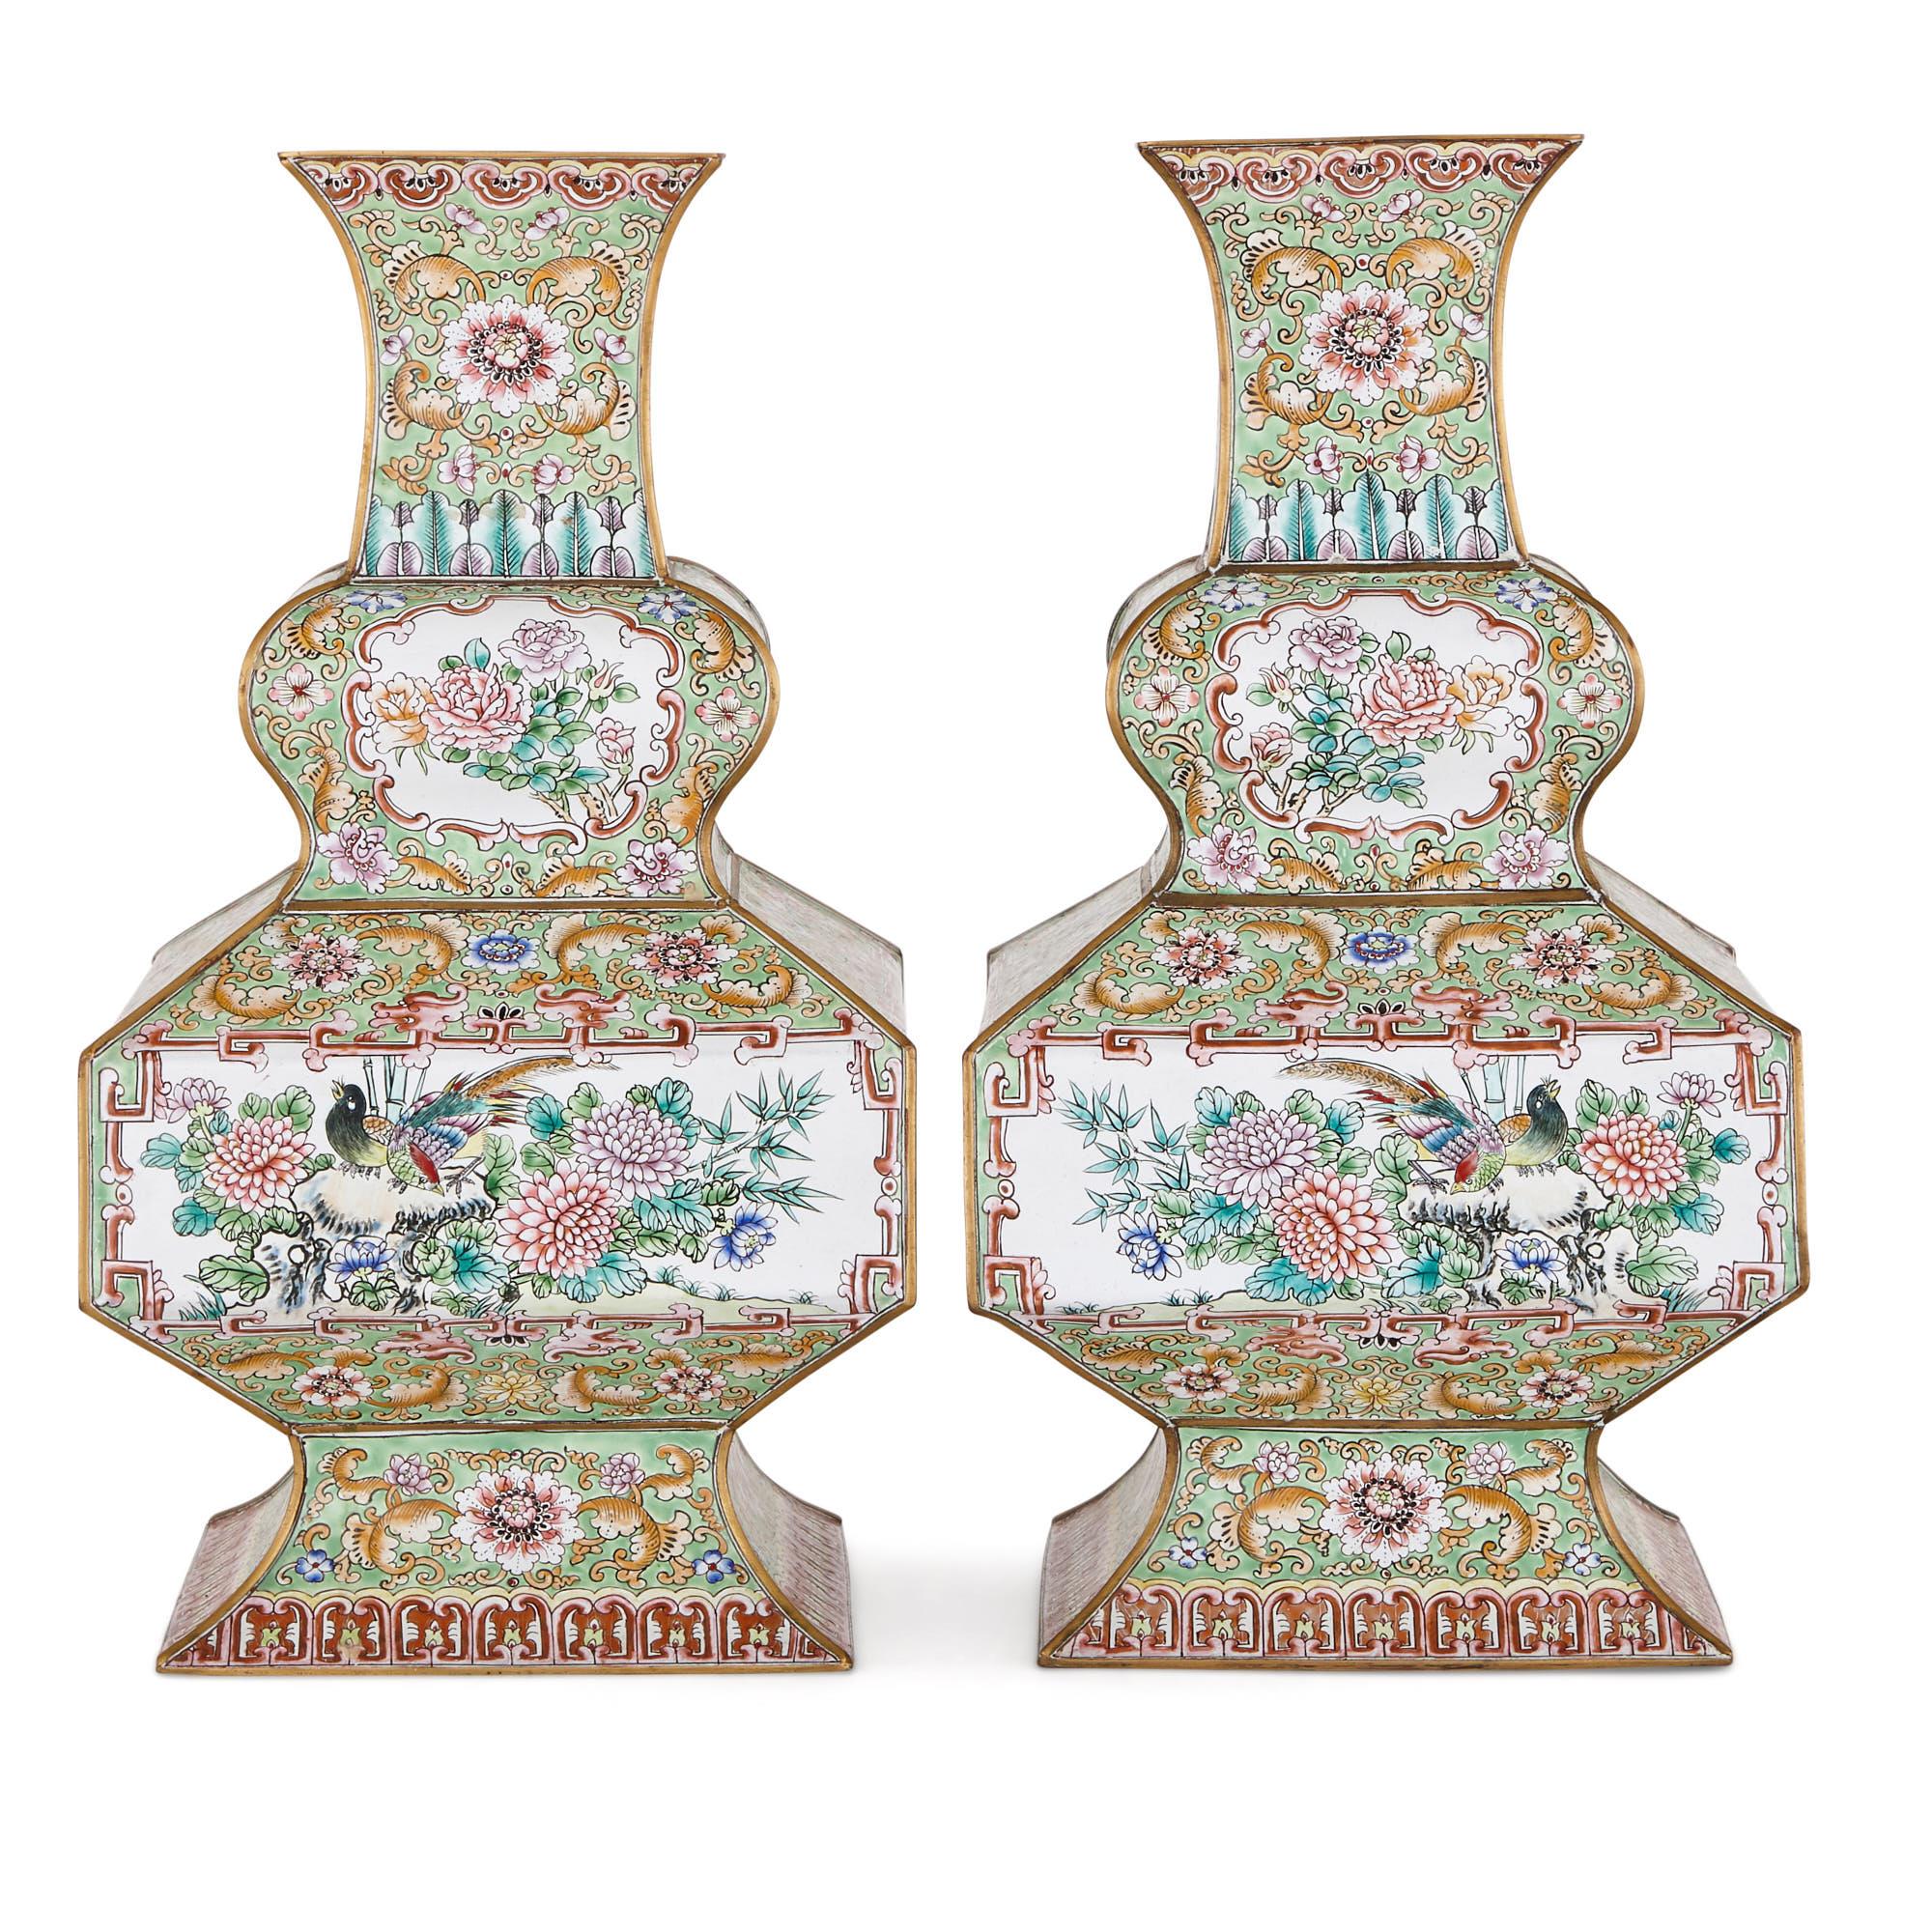 These elegant vases were created in the early 20th century, in the last decade of the Qing dynasty (1644-1911). They are covered with beautiful cloisonné enamel designs. In the cloisonné method, strips of metal are applied to the surface of an